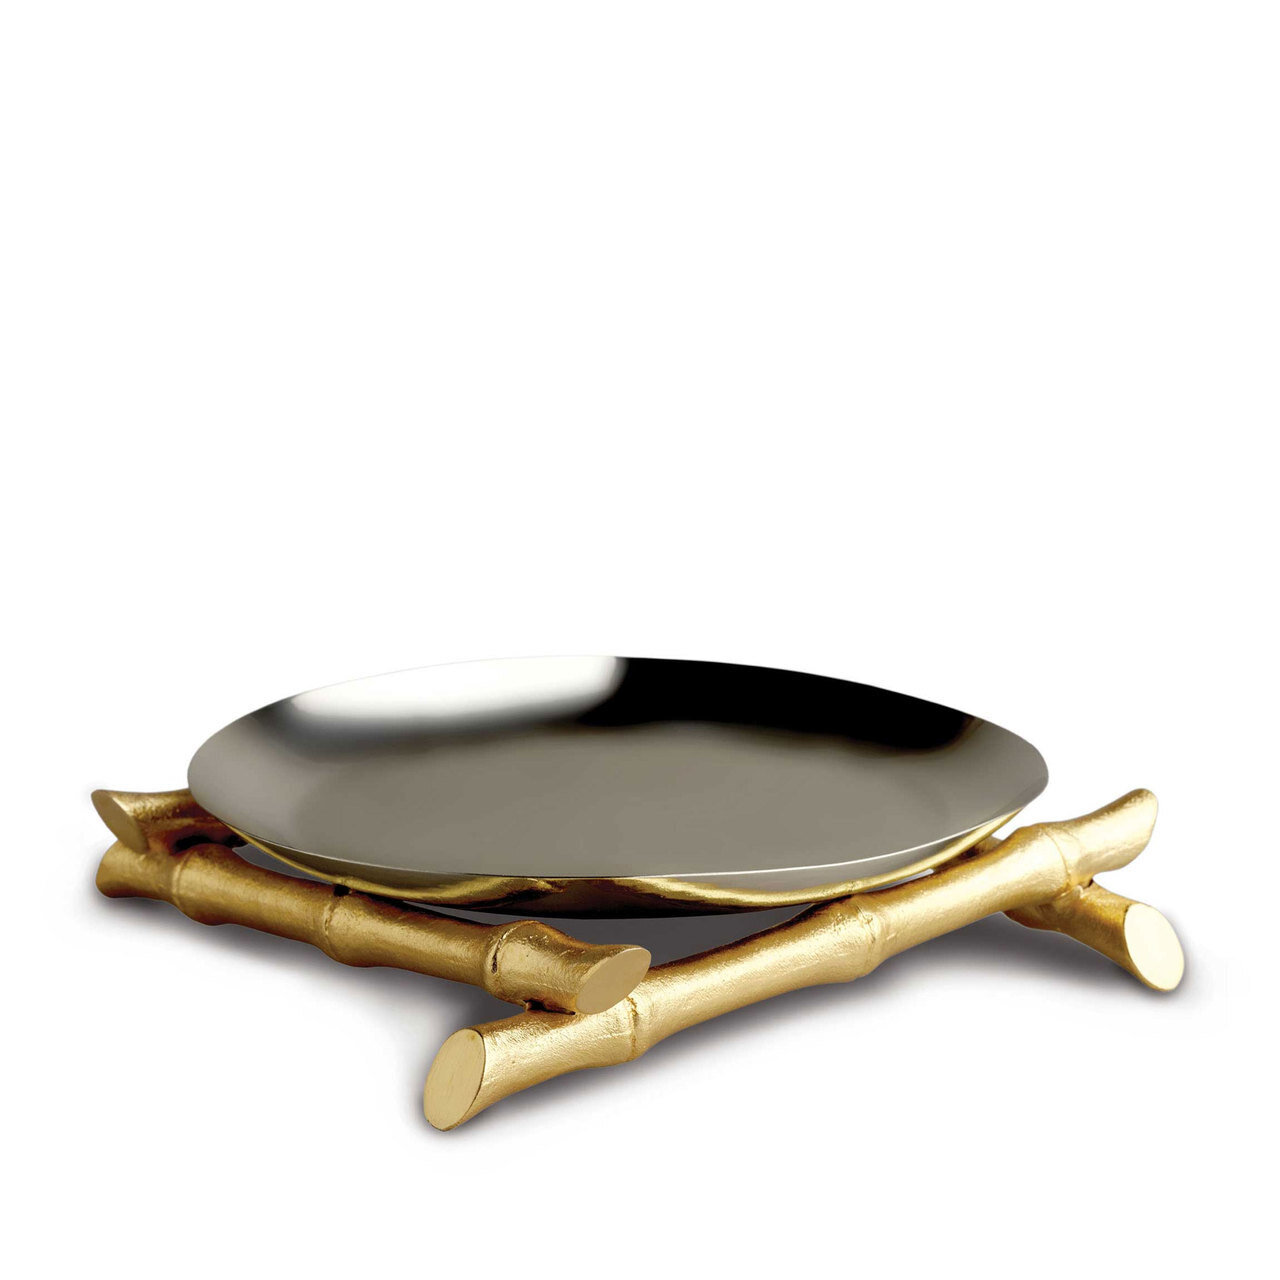 L'Objet Bambou Round Platter 24k Gold-Plated Stainless Steel